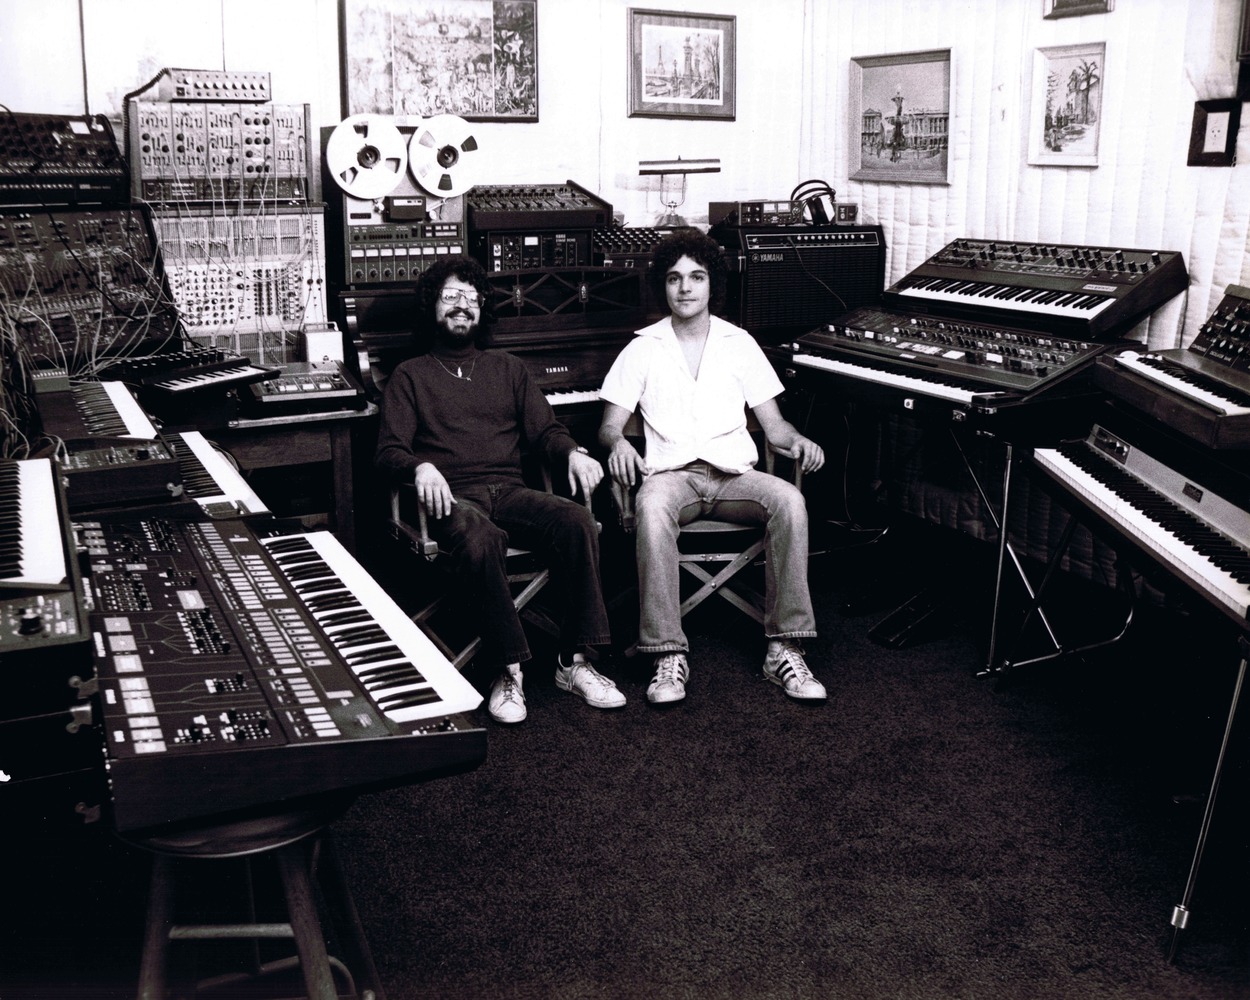 left to right, Brian Banks and Anthony Marinelli in Anthony’s synthesizer recording studio in North Hollywood, CA, 1978